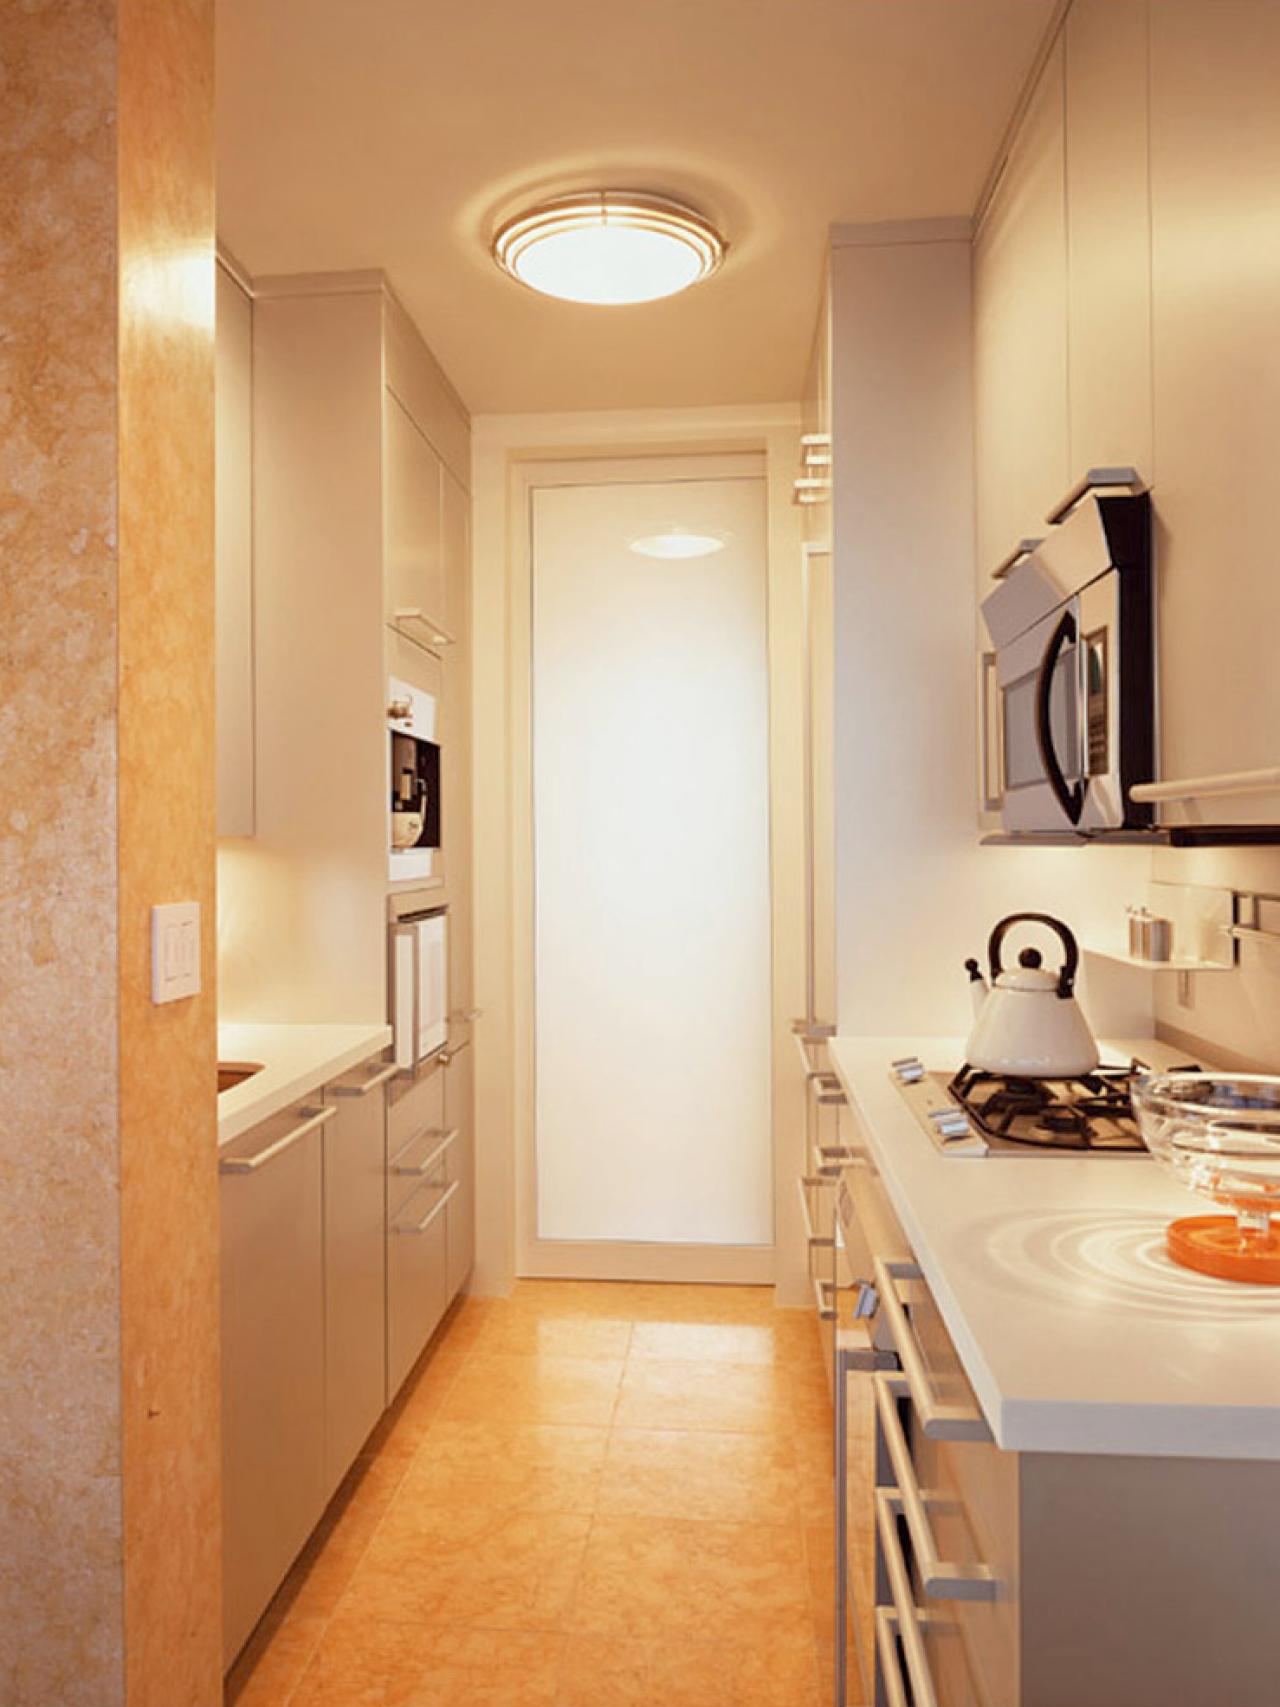 Small Galley Kitchen Design Pictures & Ideas From HGTV HGTV